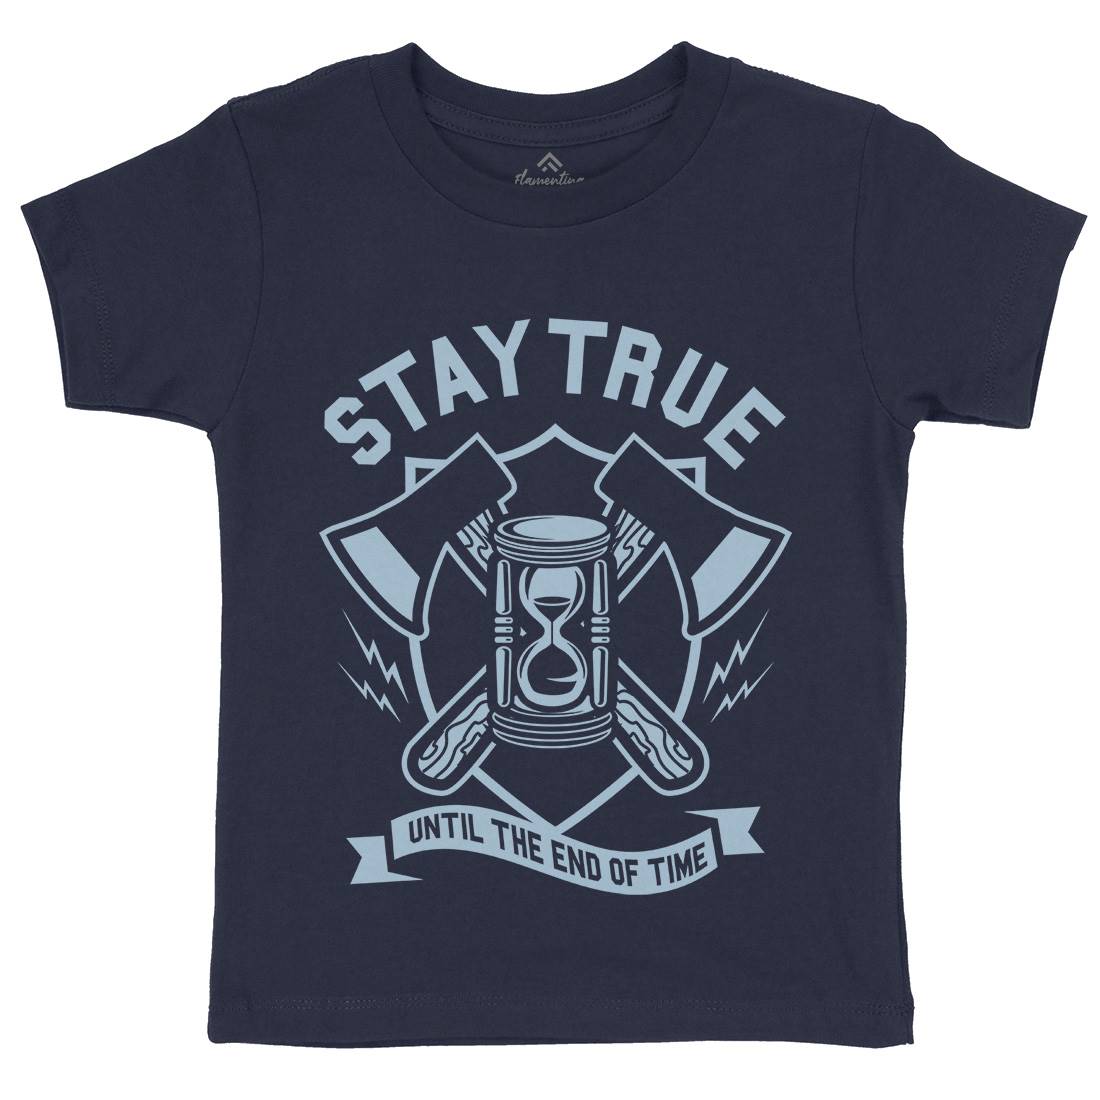 Stay True Kids Crew Neck T-Shirt Quotes A285